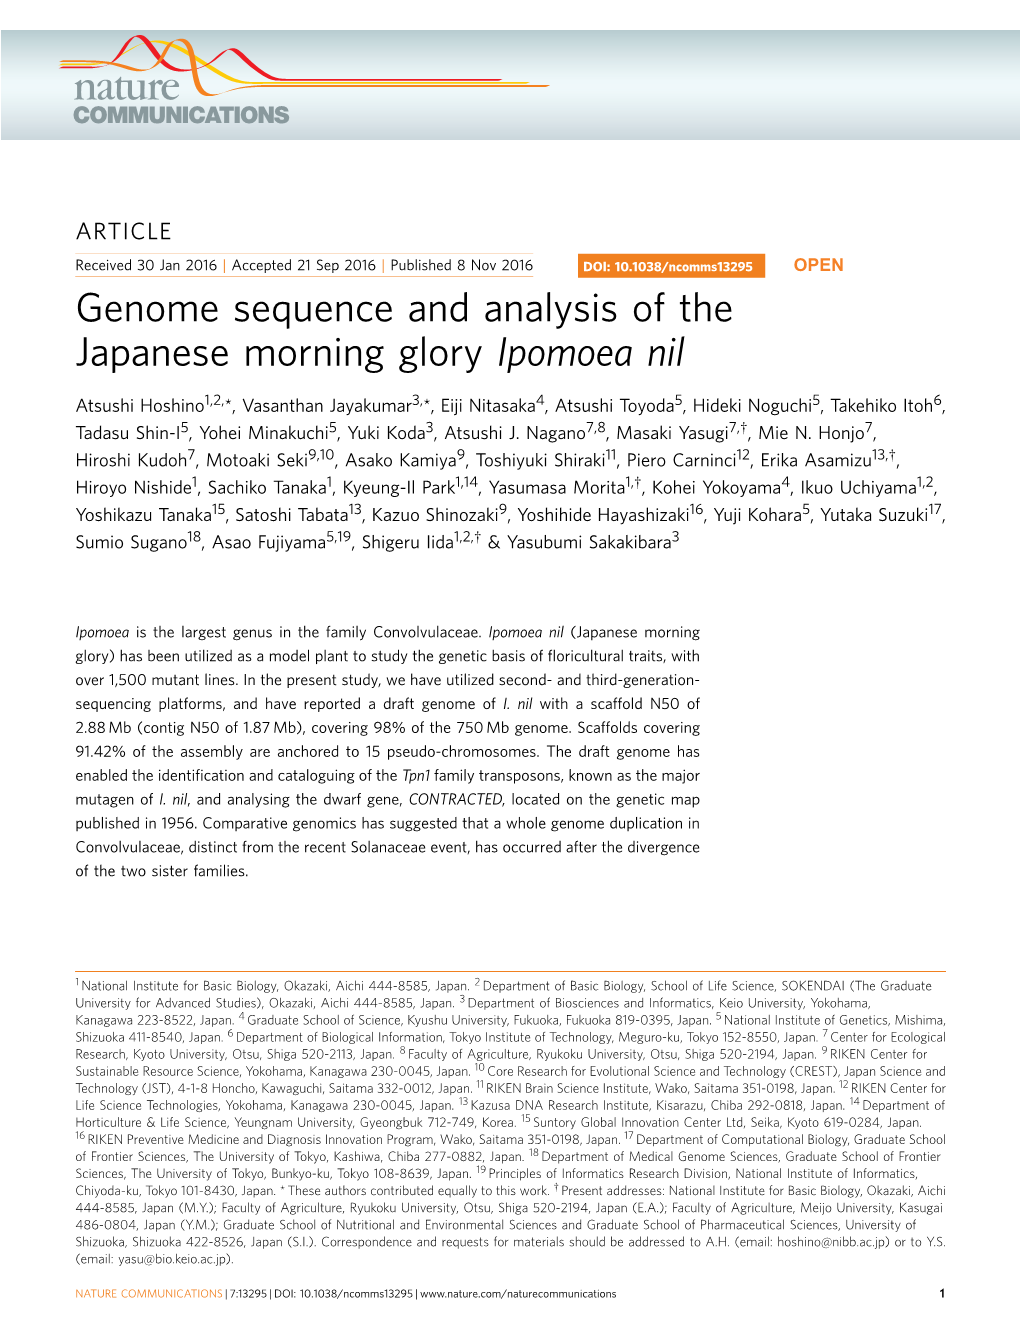 Genome Sequence and Analysis of the Japanese Morning Glory Ipomoea Nil